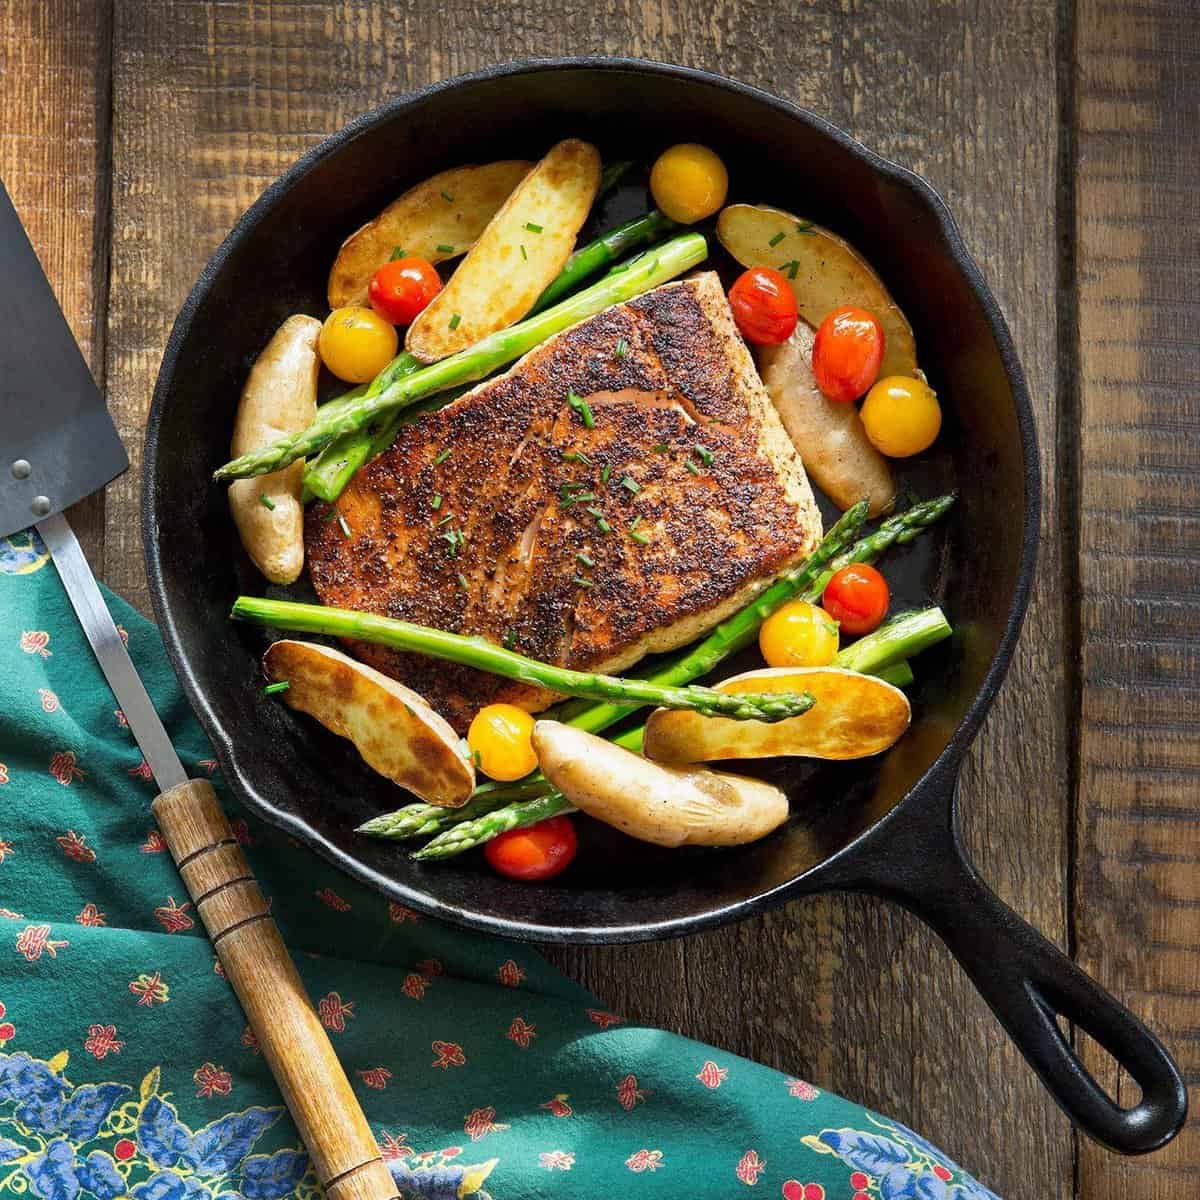 A Simple Chef cast iron skillet with roasted fish, potatoes, tomatoes and asparagus in it.